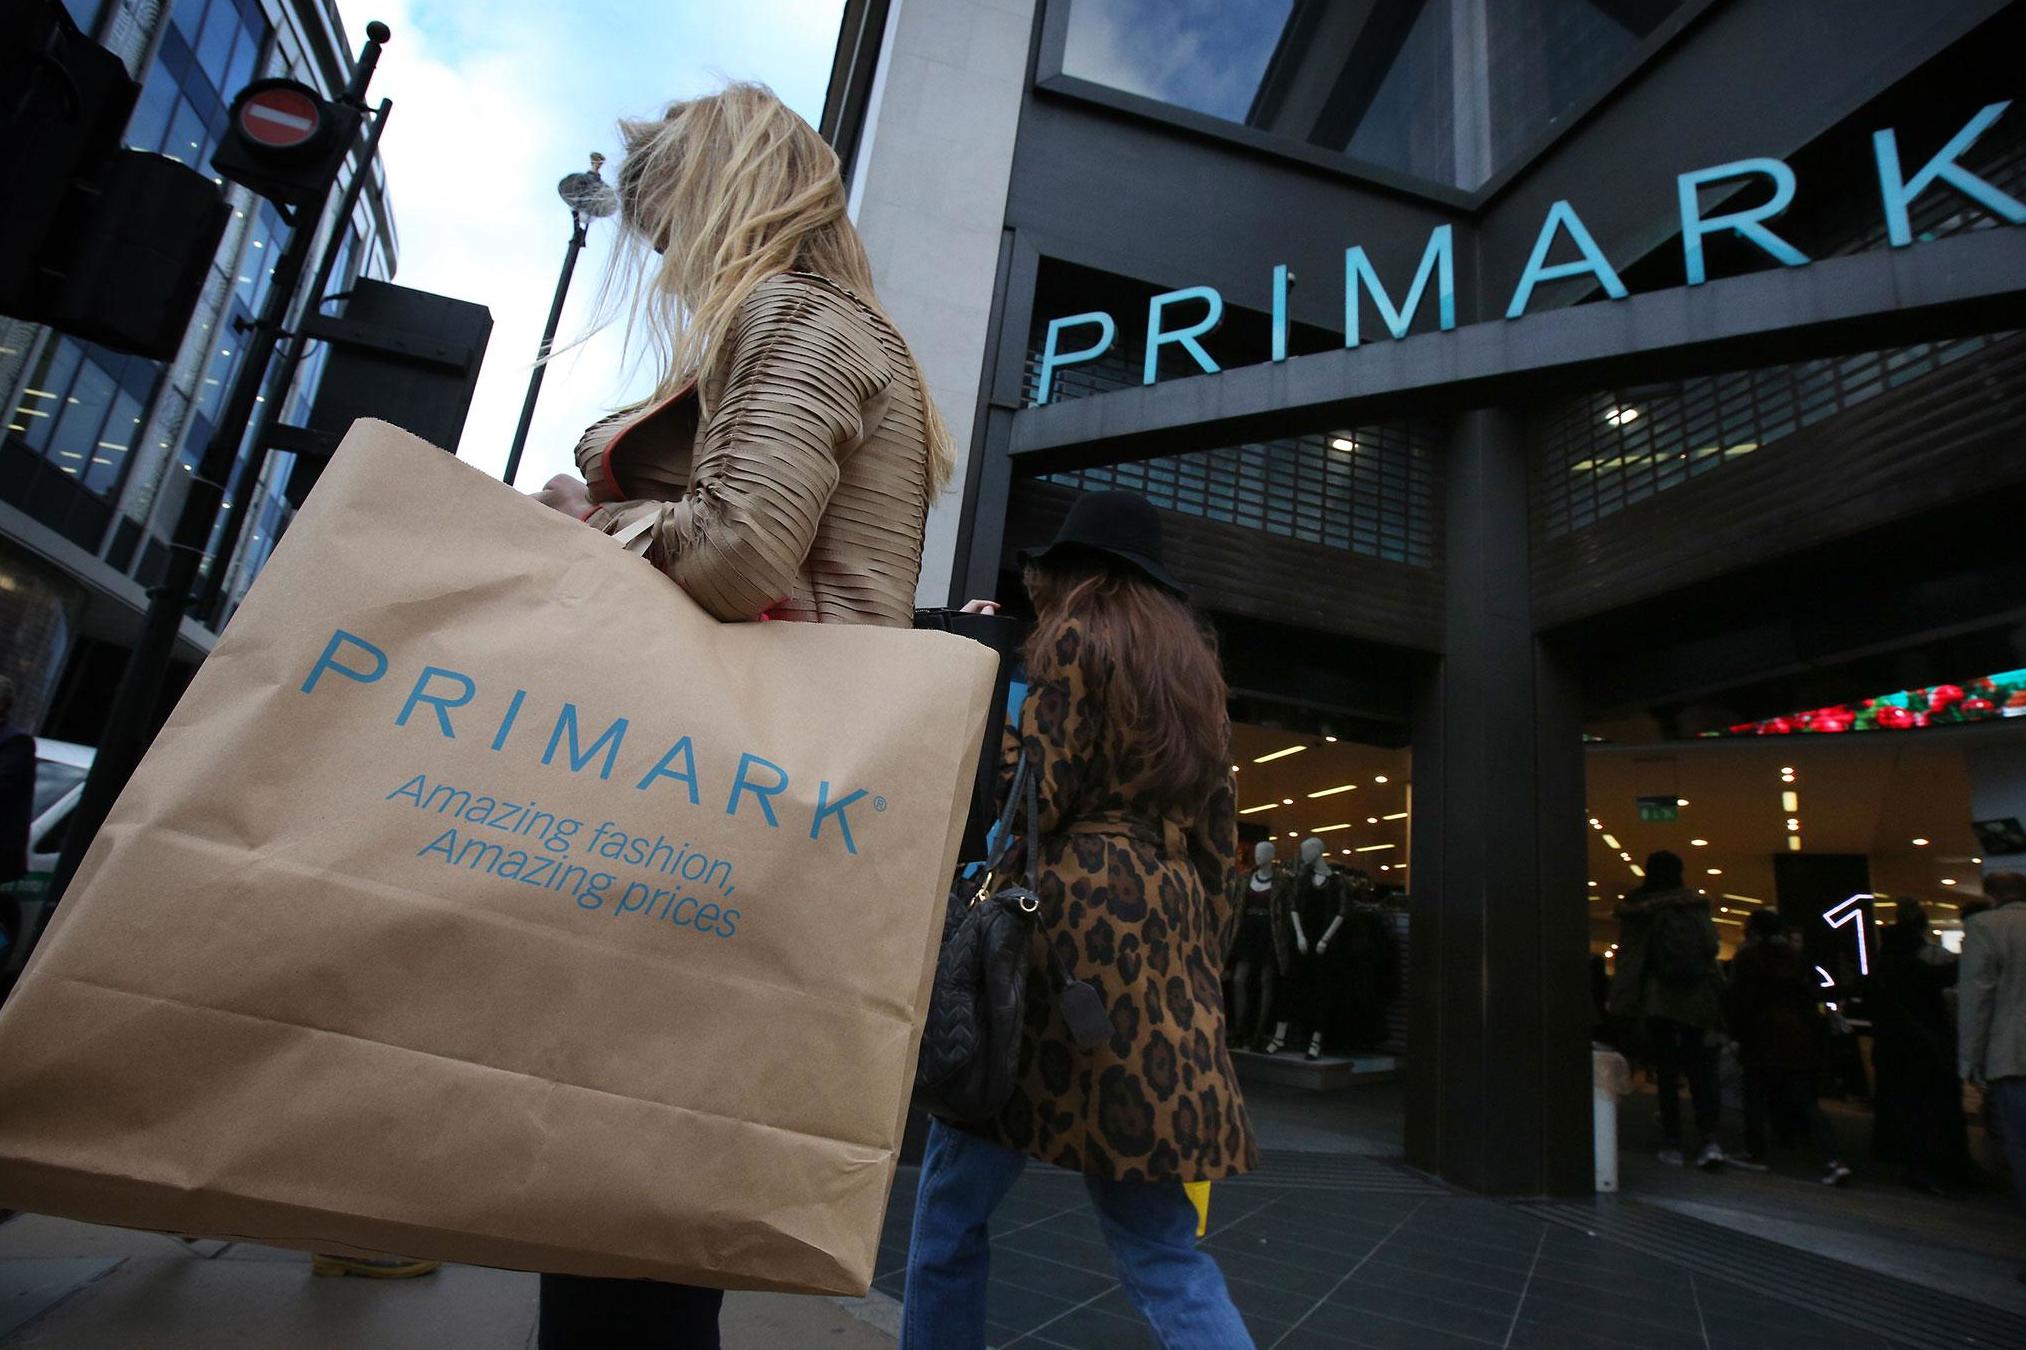 Primark has reported its first drop in UK sales for 16 years